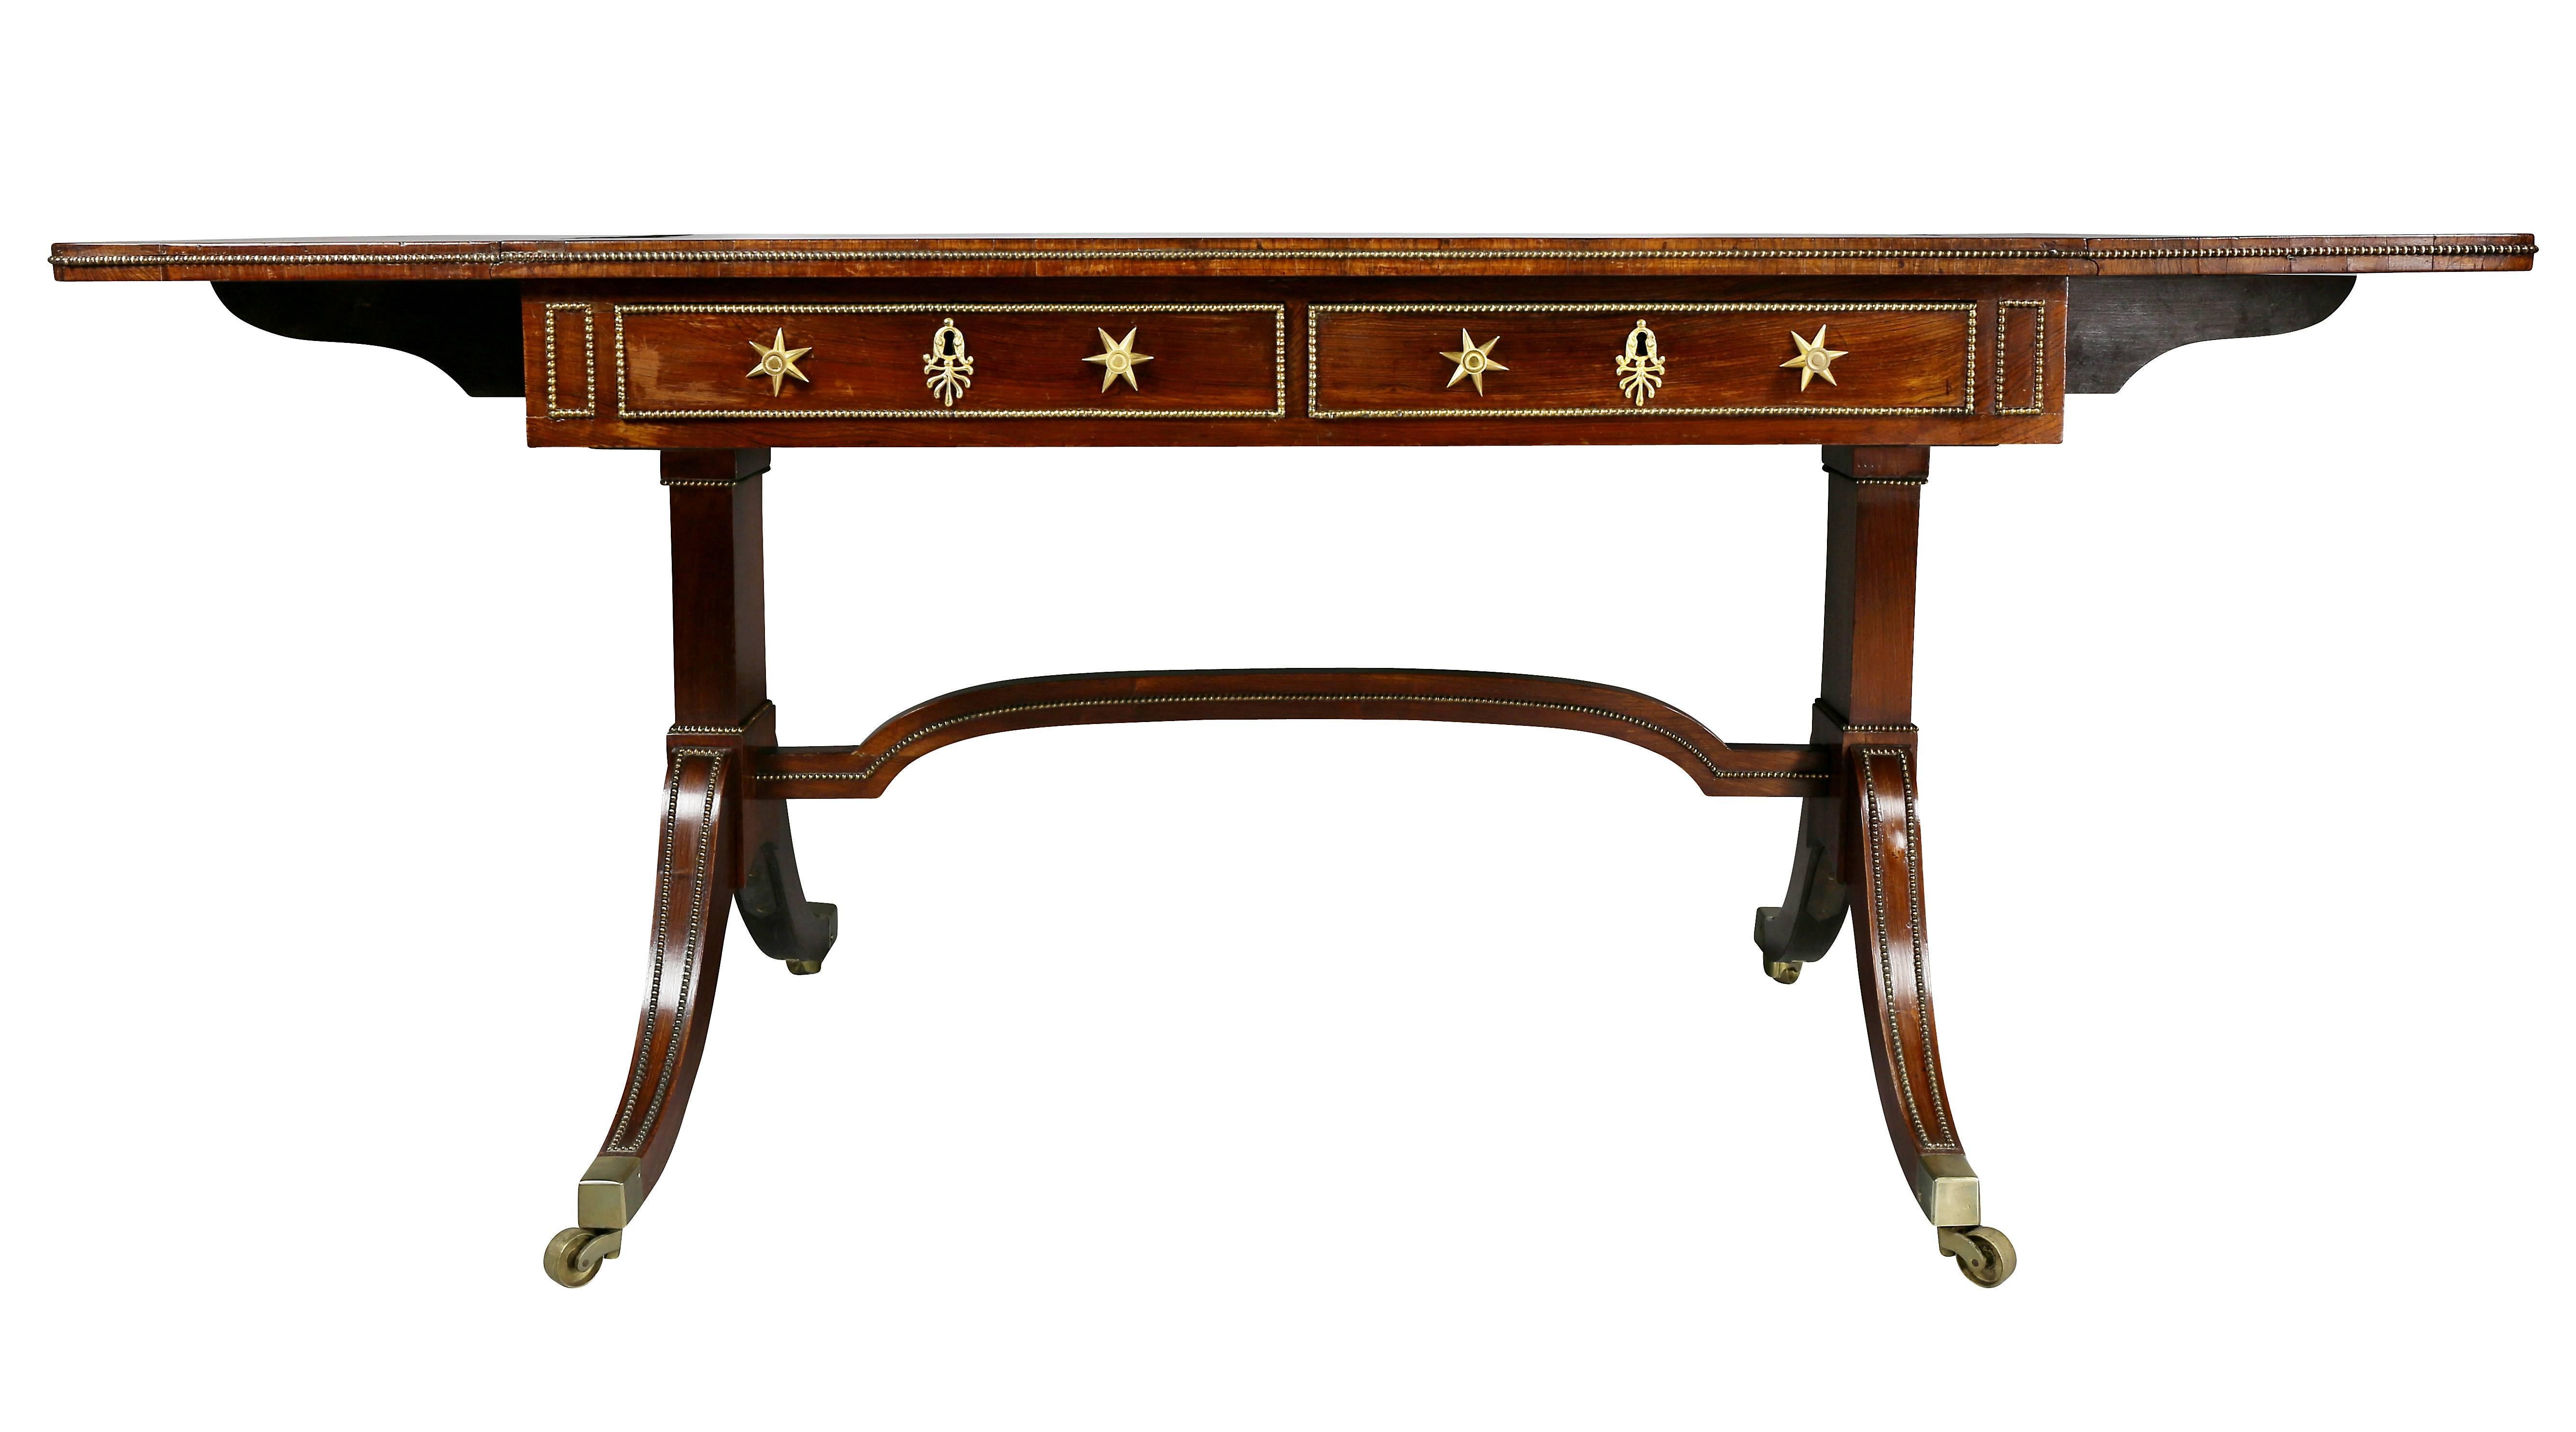 With rectangular drop leaves and beaded edge over two drawers with star form handle backplates over a trestle support joined by a stretcher raised on saber legs with casters.